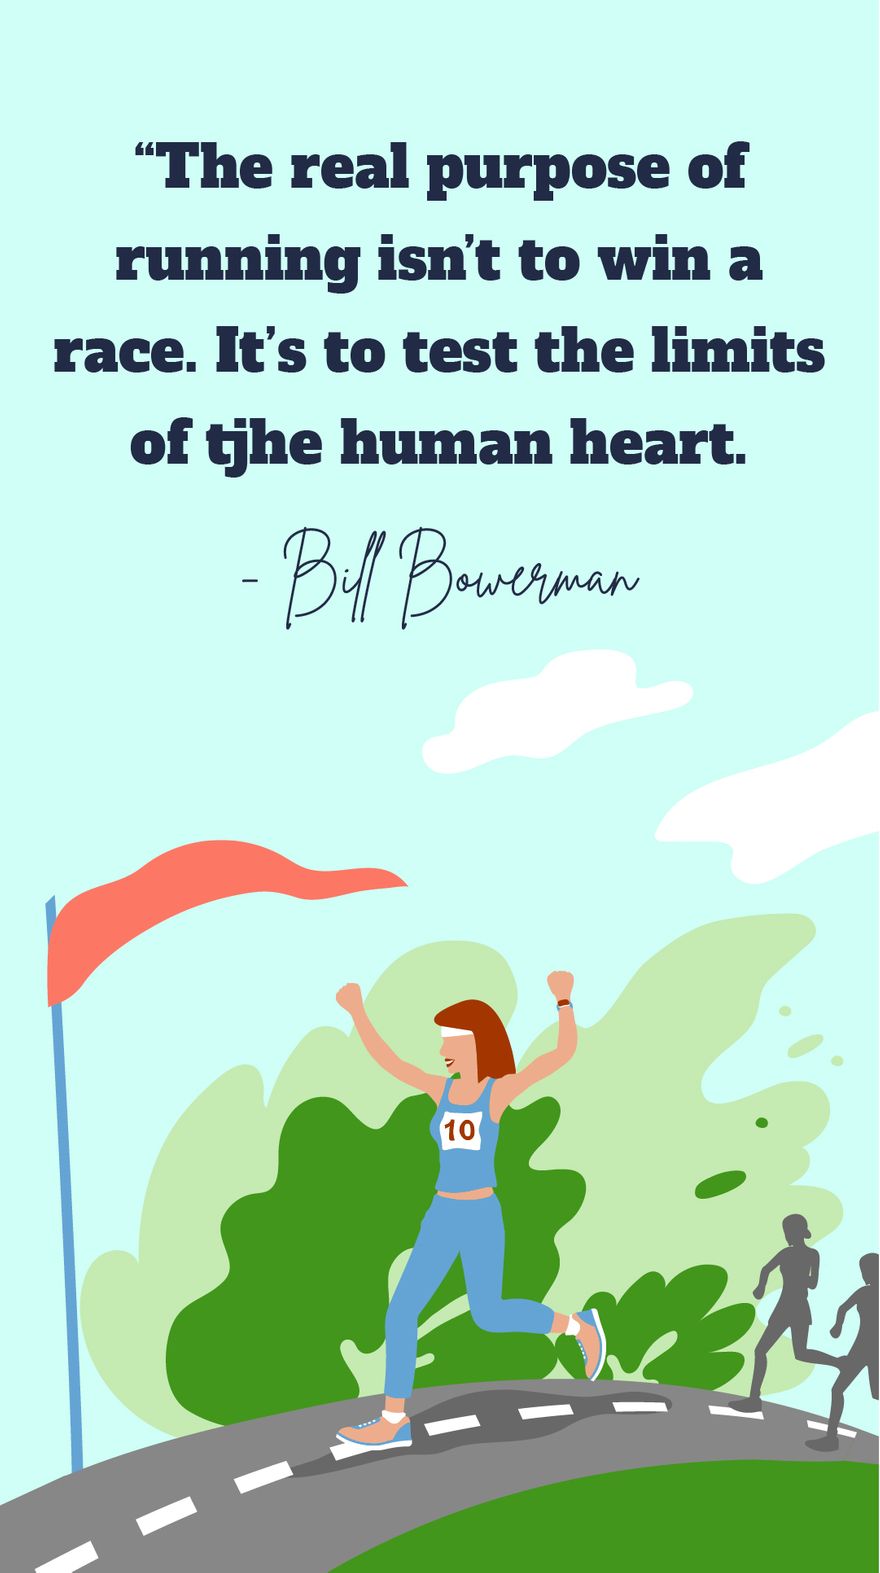 Free Bill Bowerman-The real purpose of running isn’t to win a race. It’s to test the limits of the human heart. in JPG